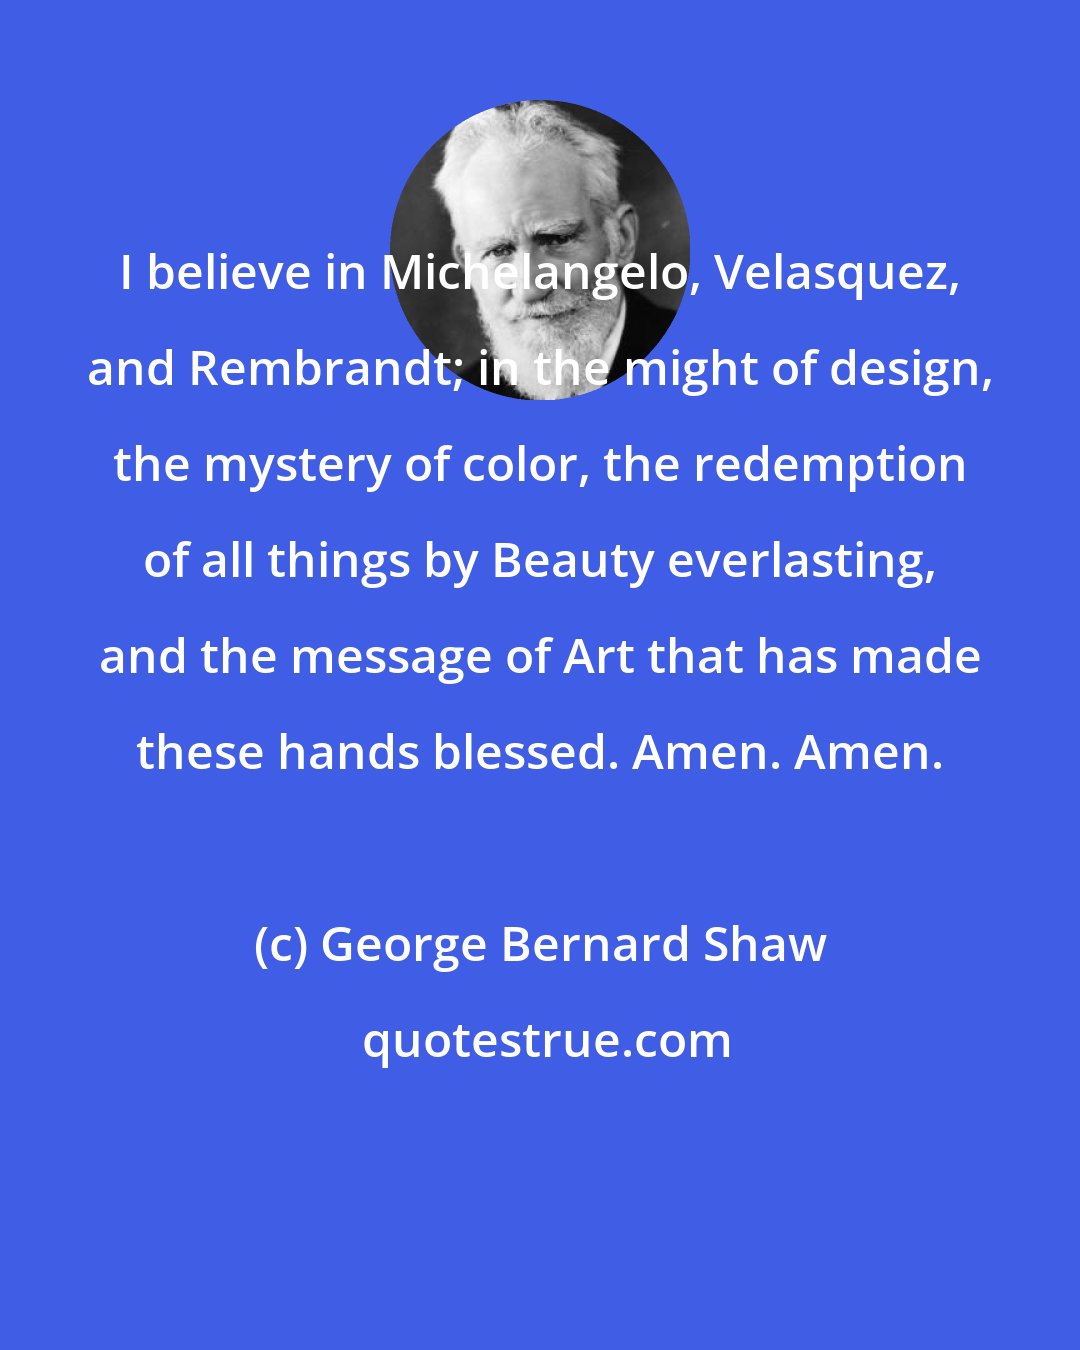 George Bernard Shaw: I believe in Michelangelo, Velasquez, and Rembrandt; in the might of design, the mystery of color, the redemption of all things by Beauty everlasting, and the message of Art that has made these hands blessed. Amen. Amen.